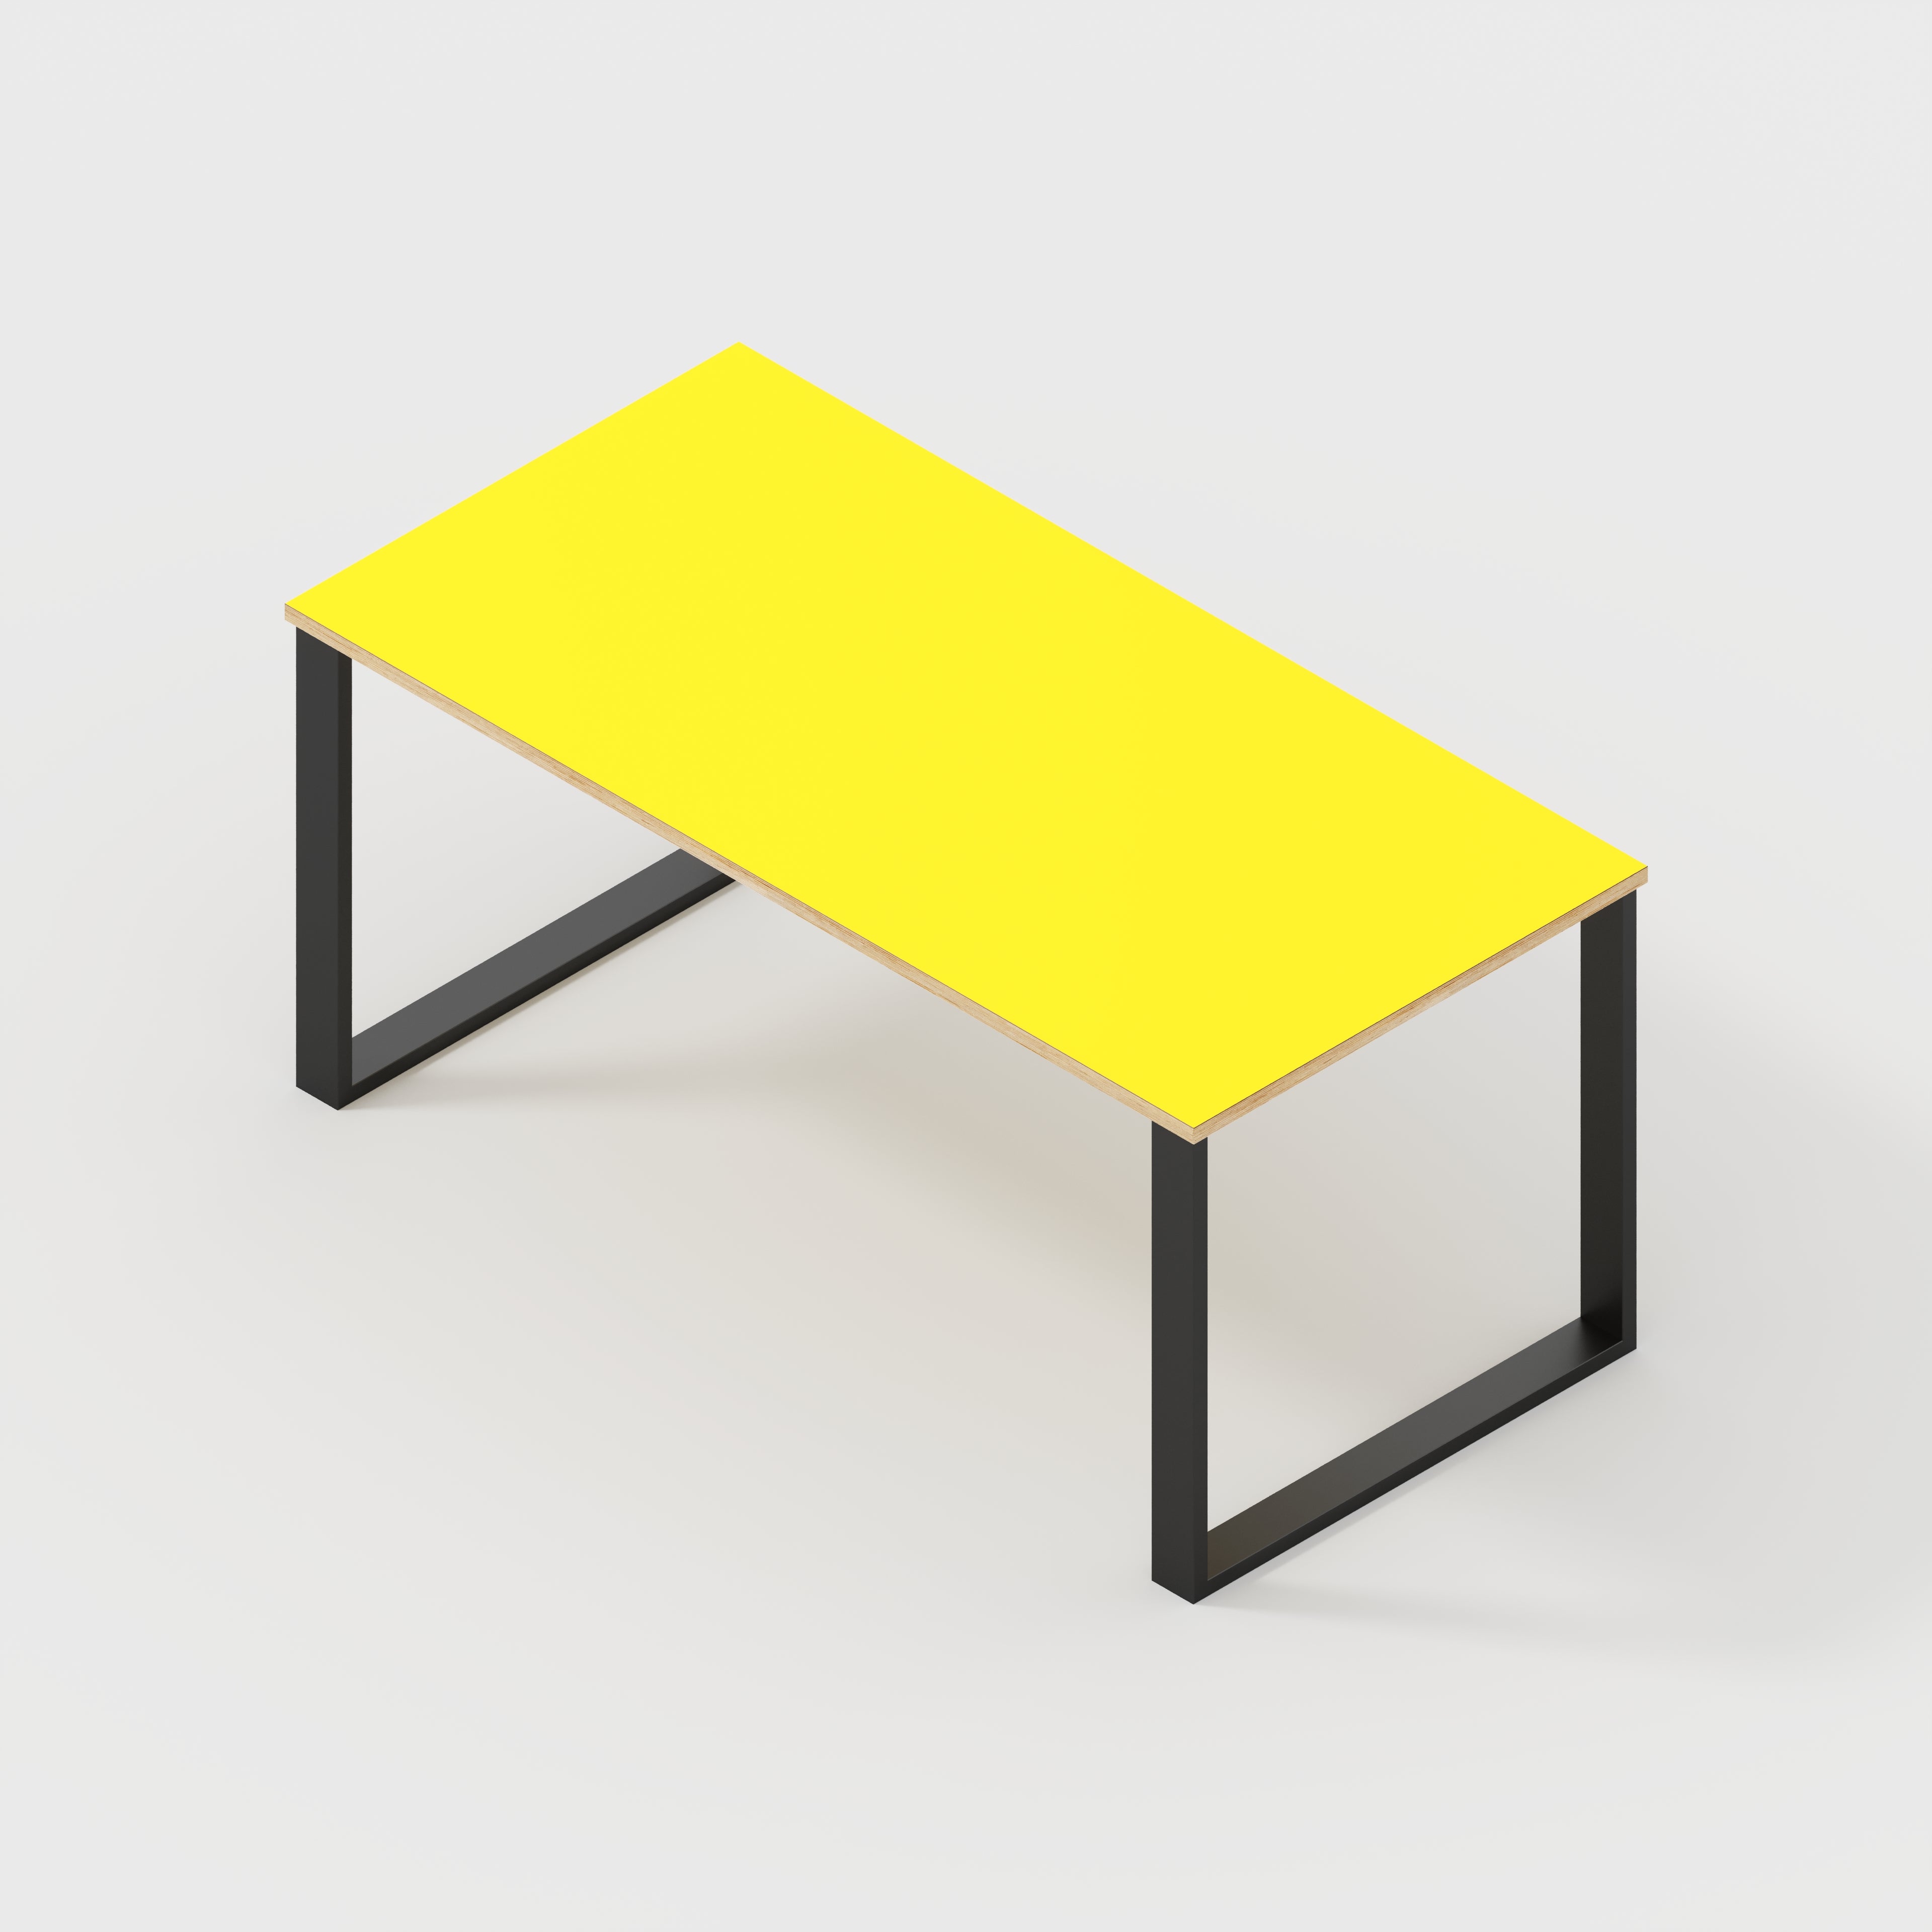 Table with Black Industrial Legs - Formica Chrome Yellow - 1600(w) x 800(d)